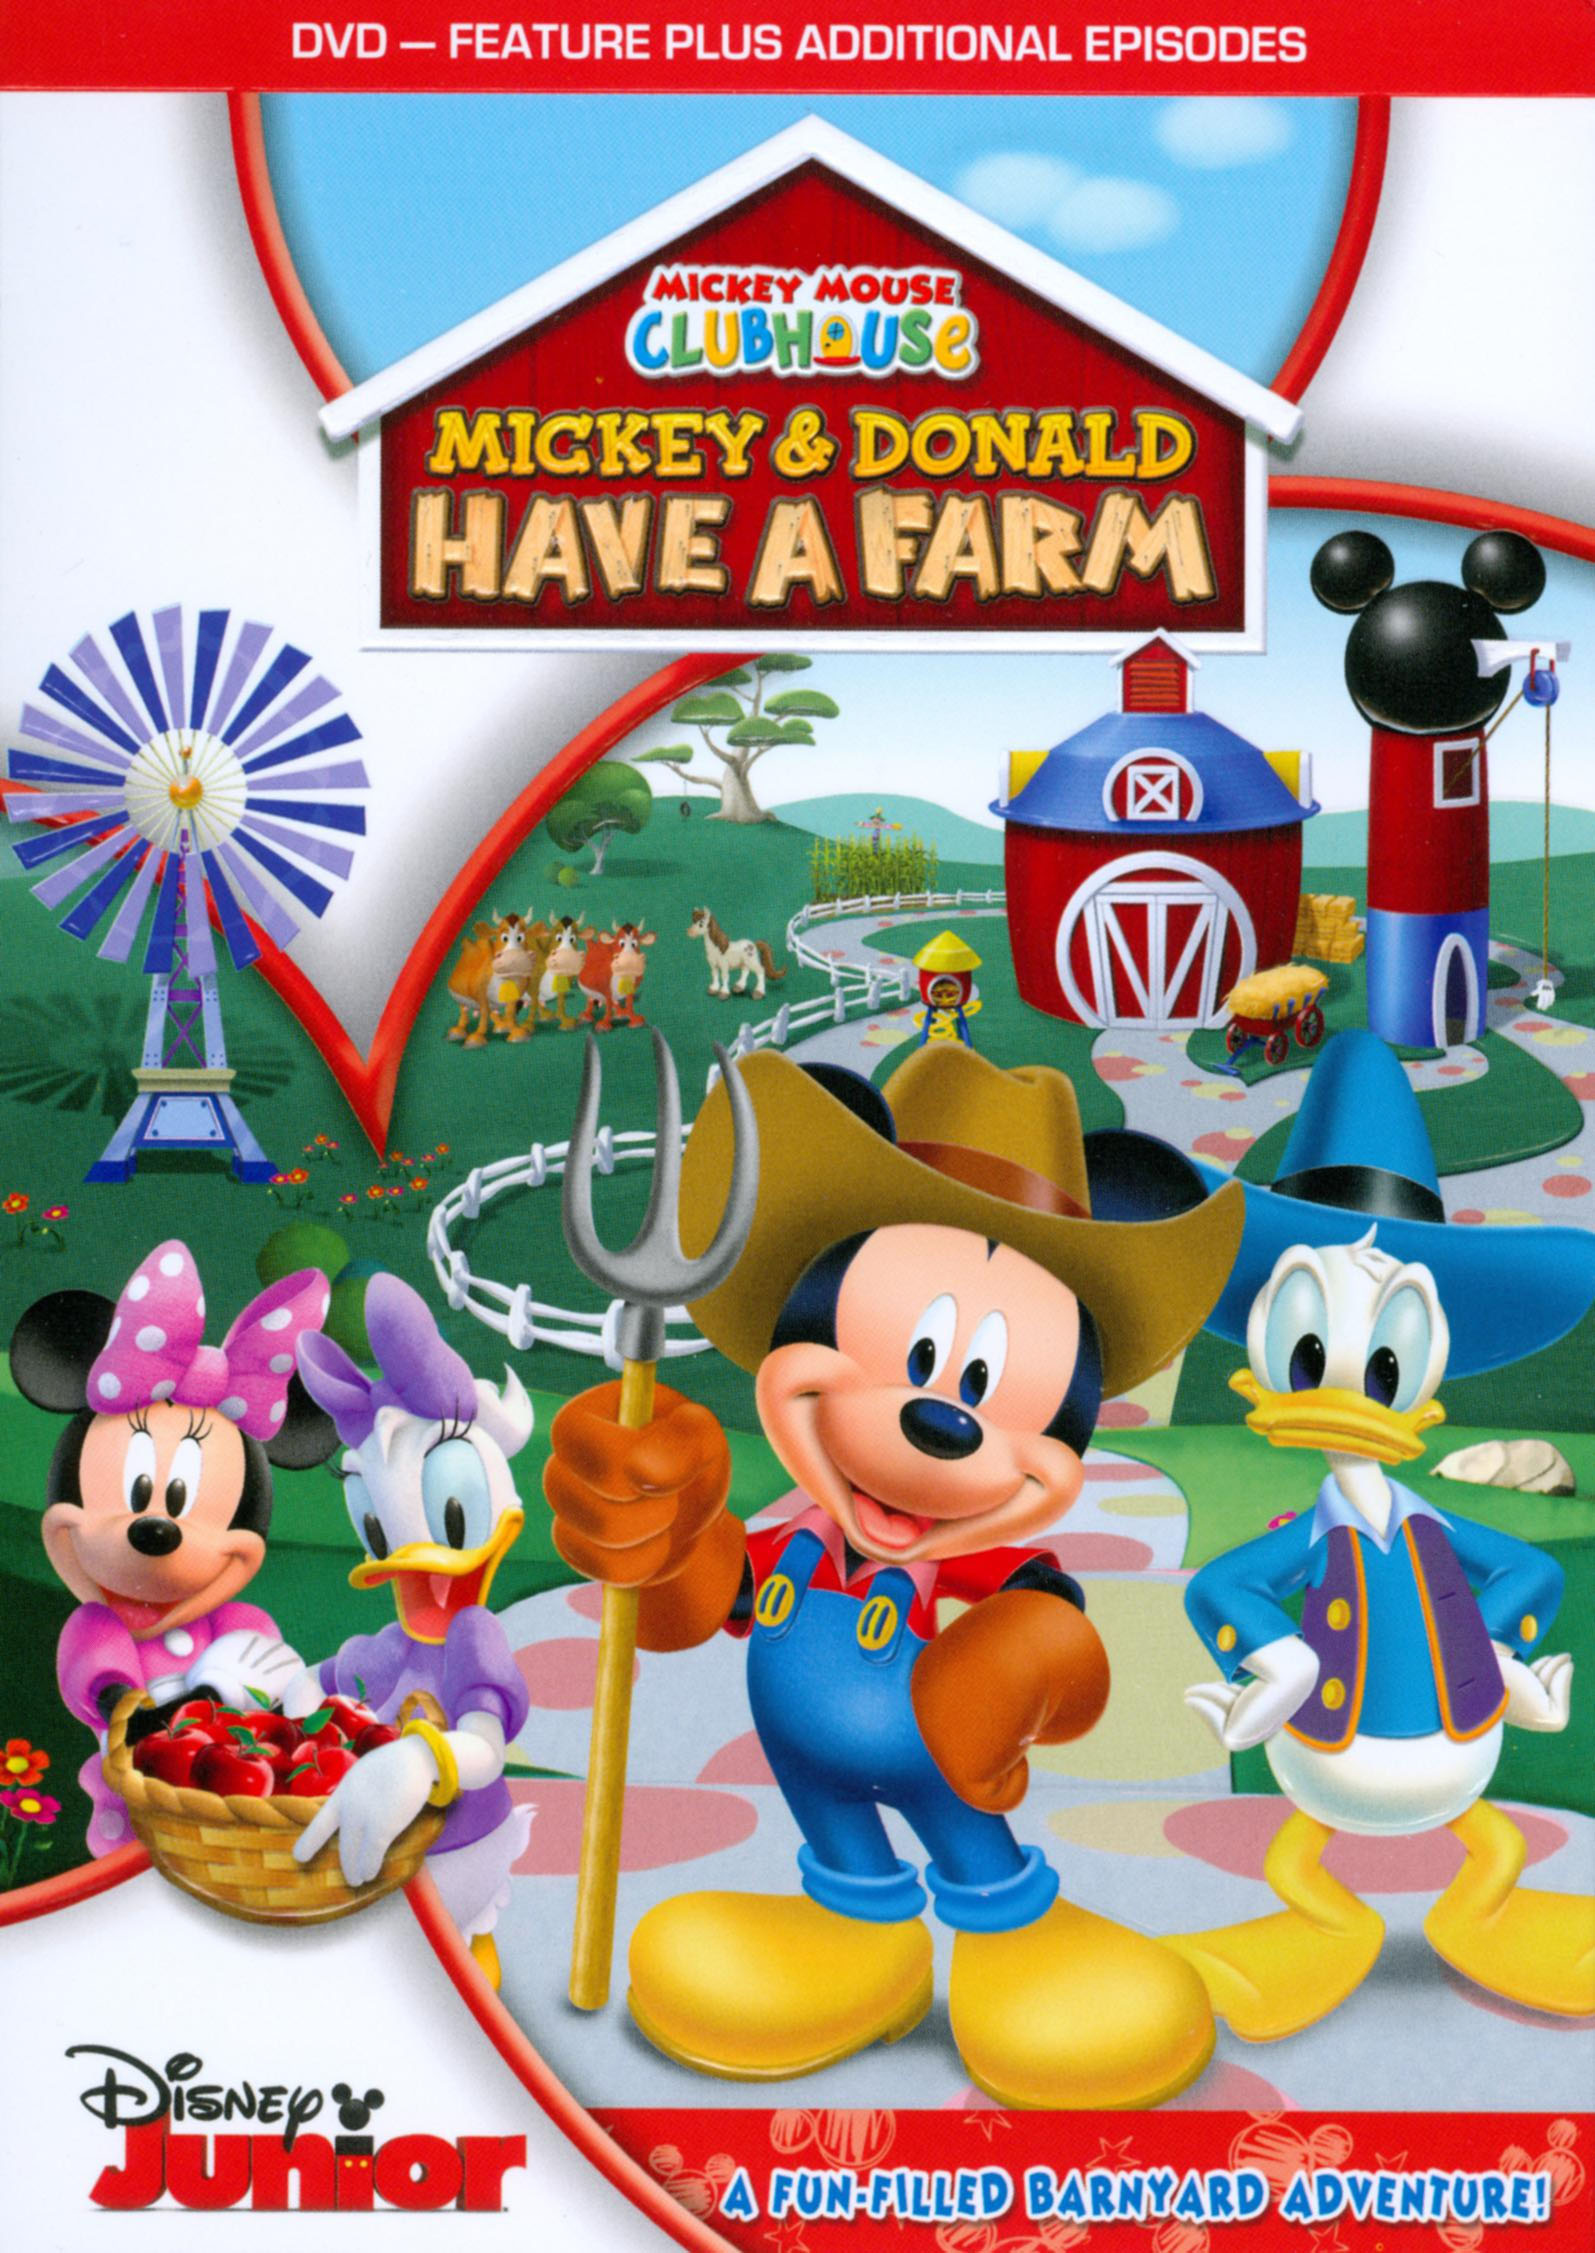 Mickey Mouse Clubhouse: Mickey & Donald Have a Farm - Best Buy